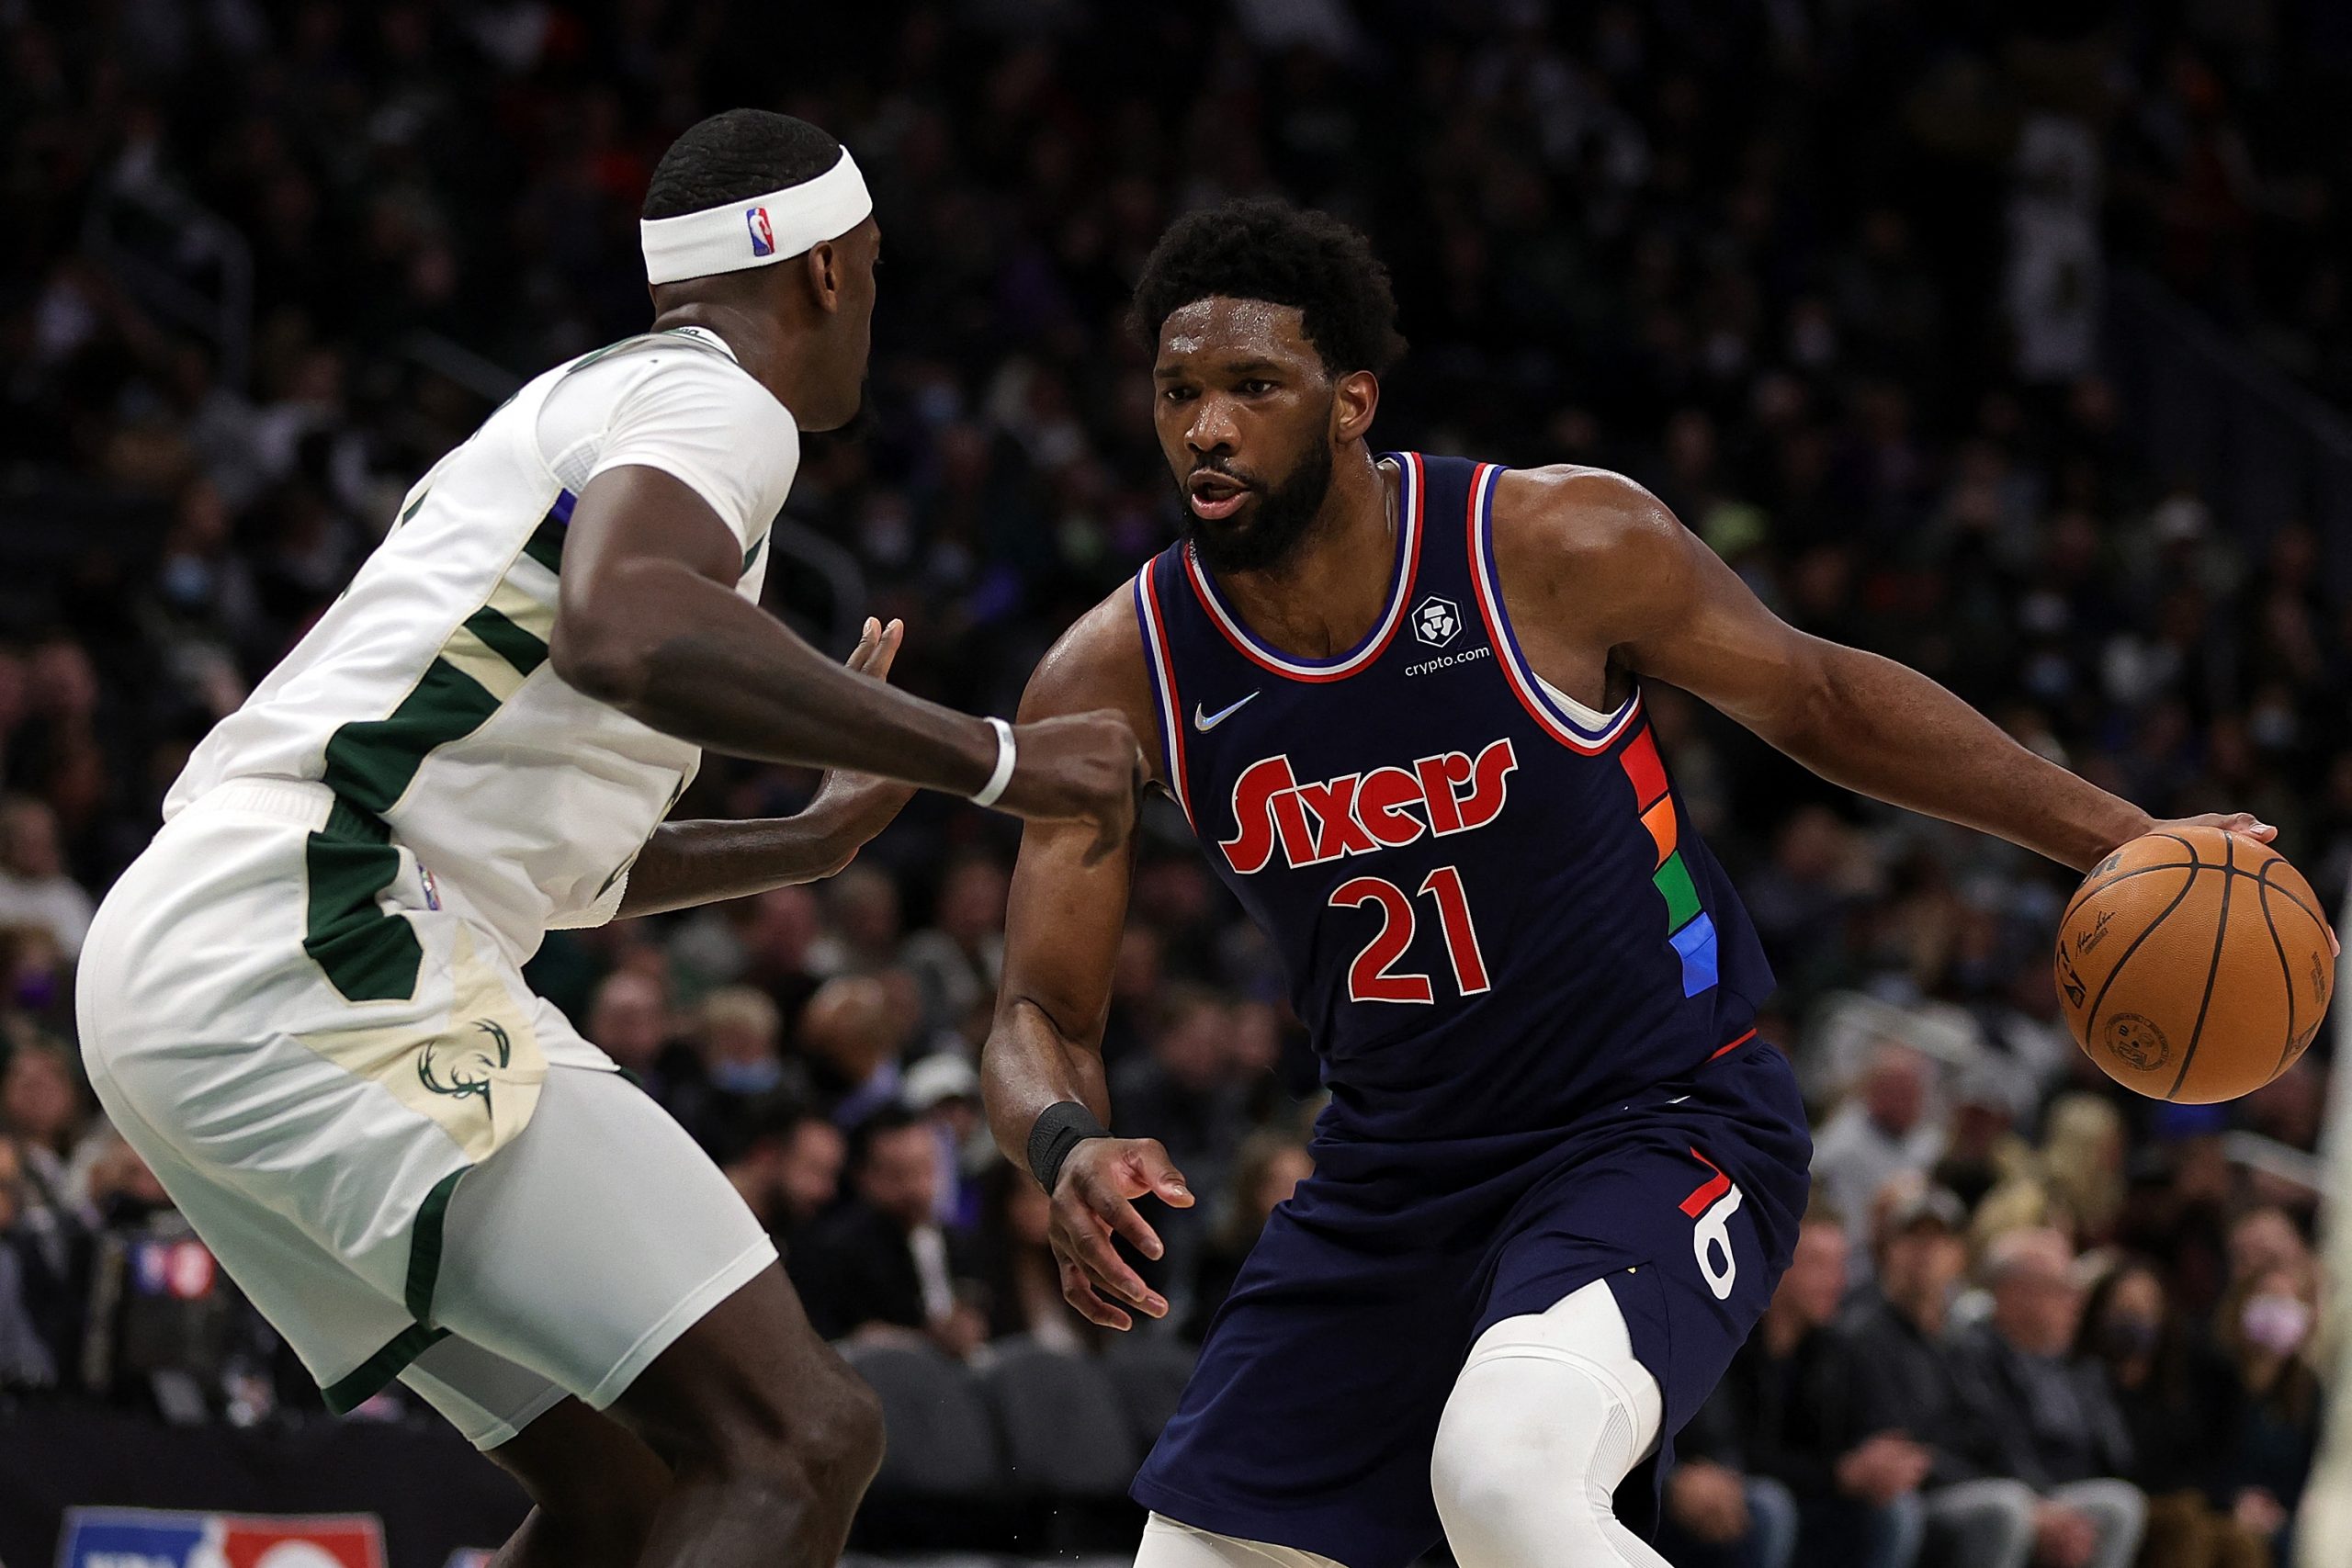 Embiid scores 42 to lead way to win